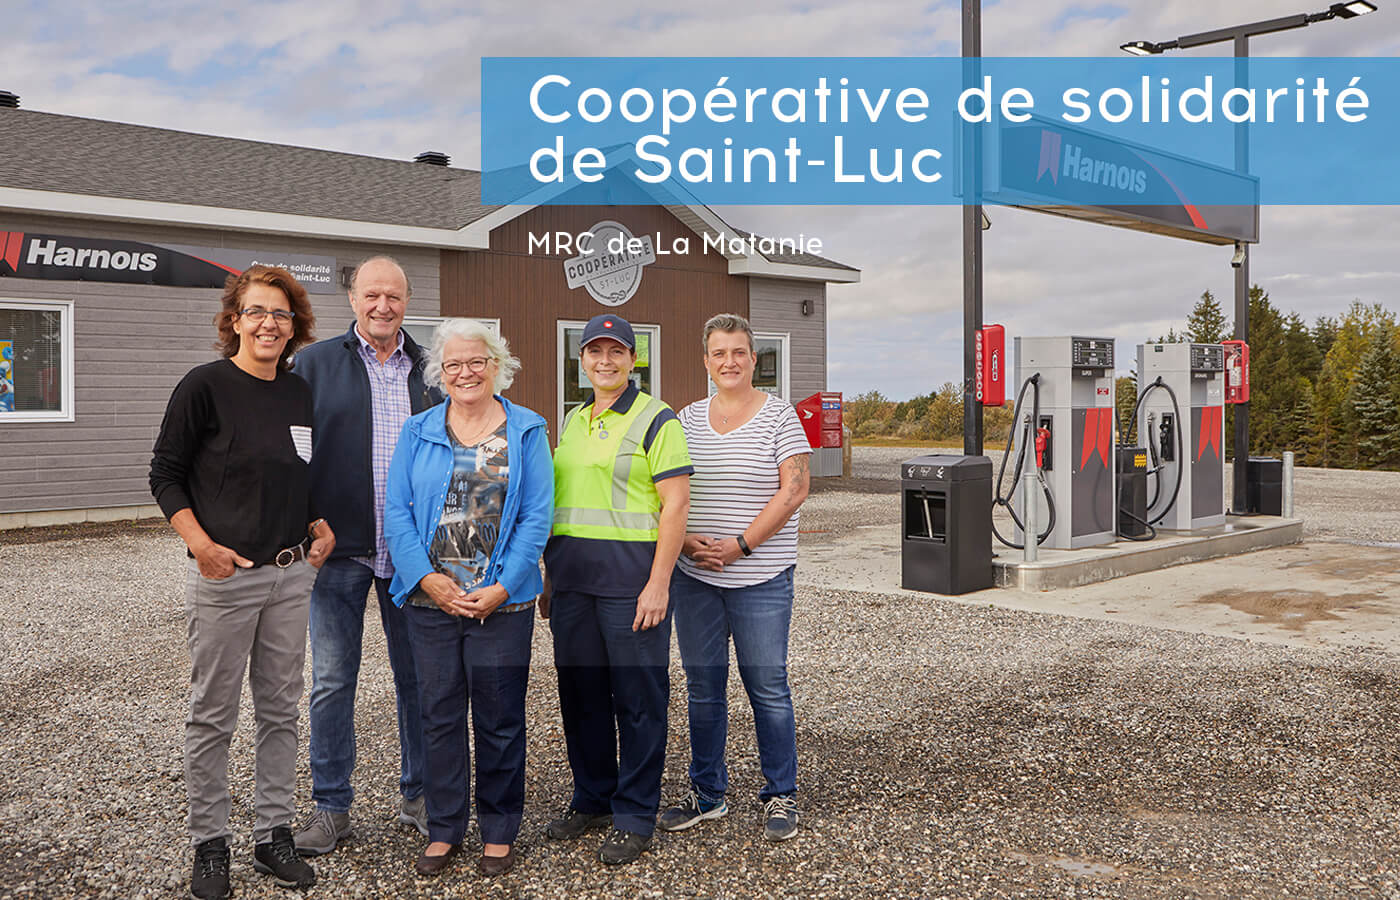 Groupe 1 Coop st luc